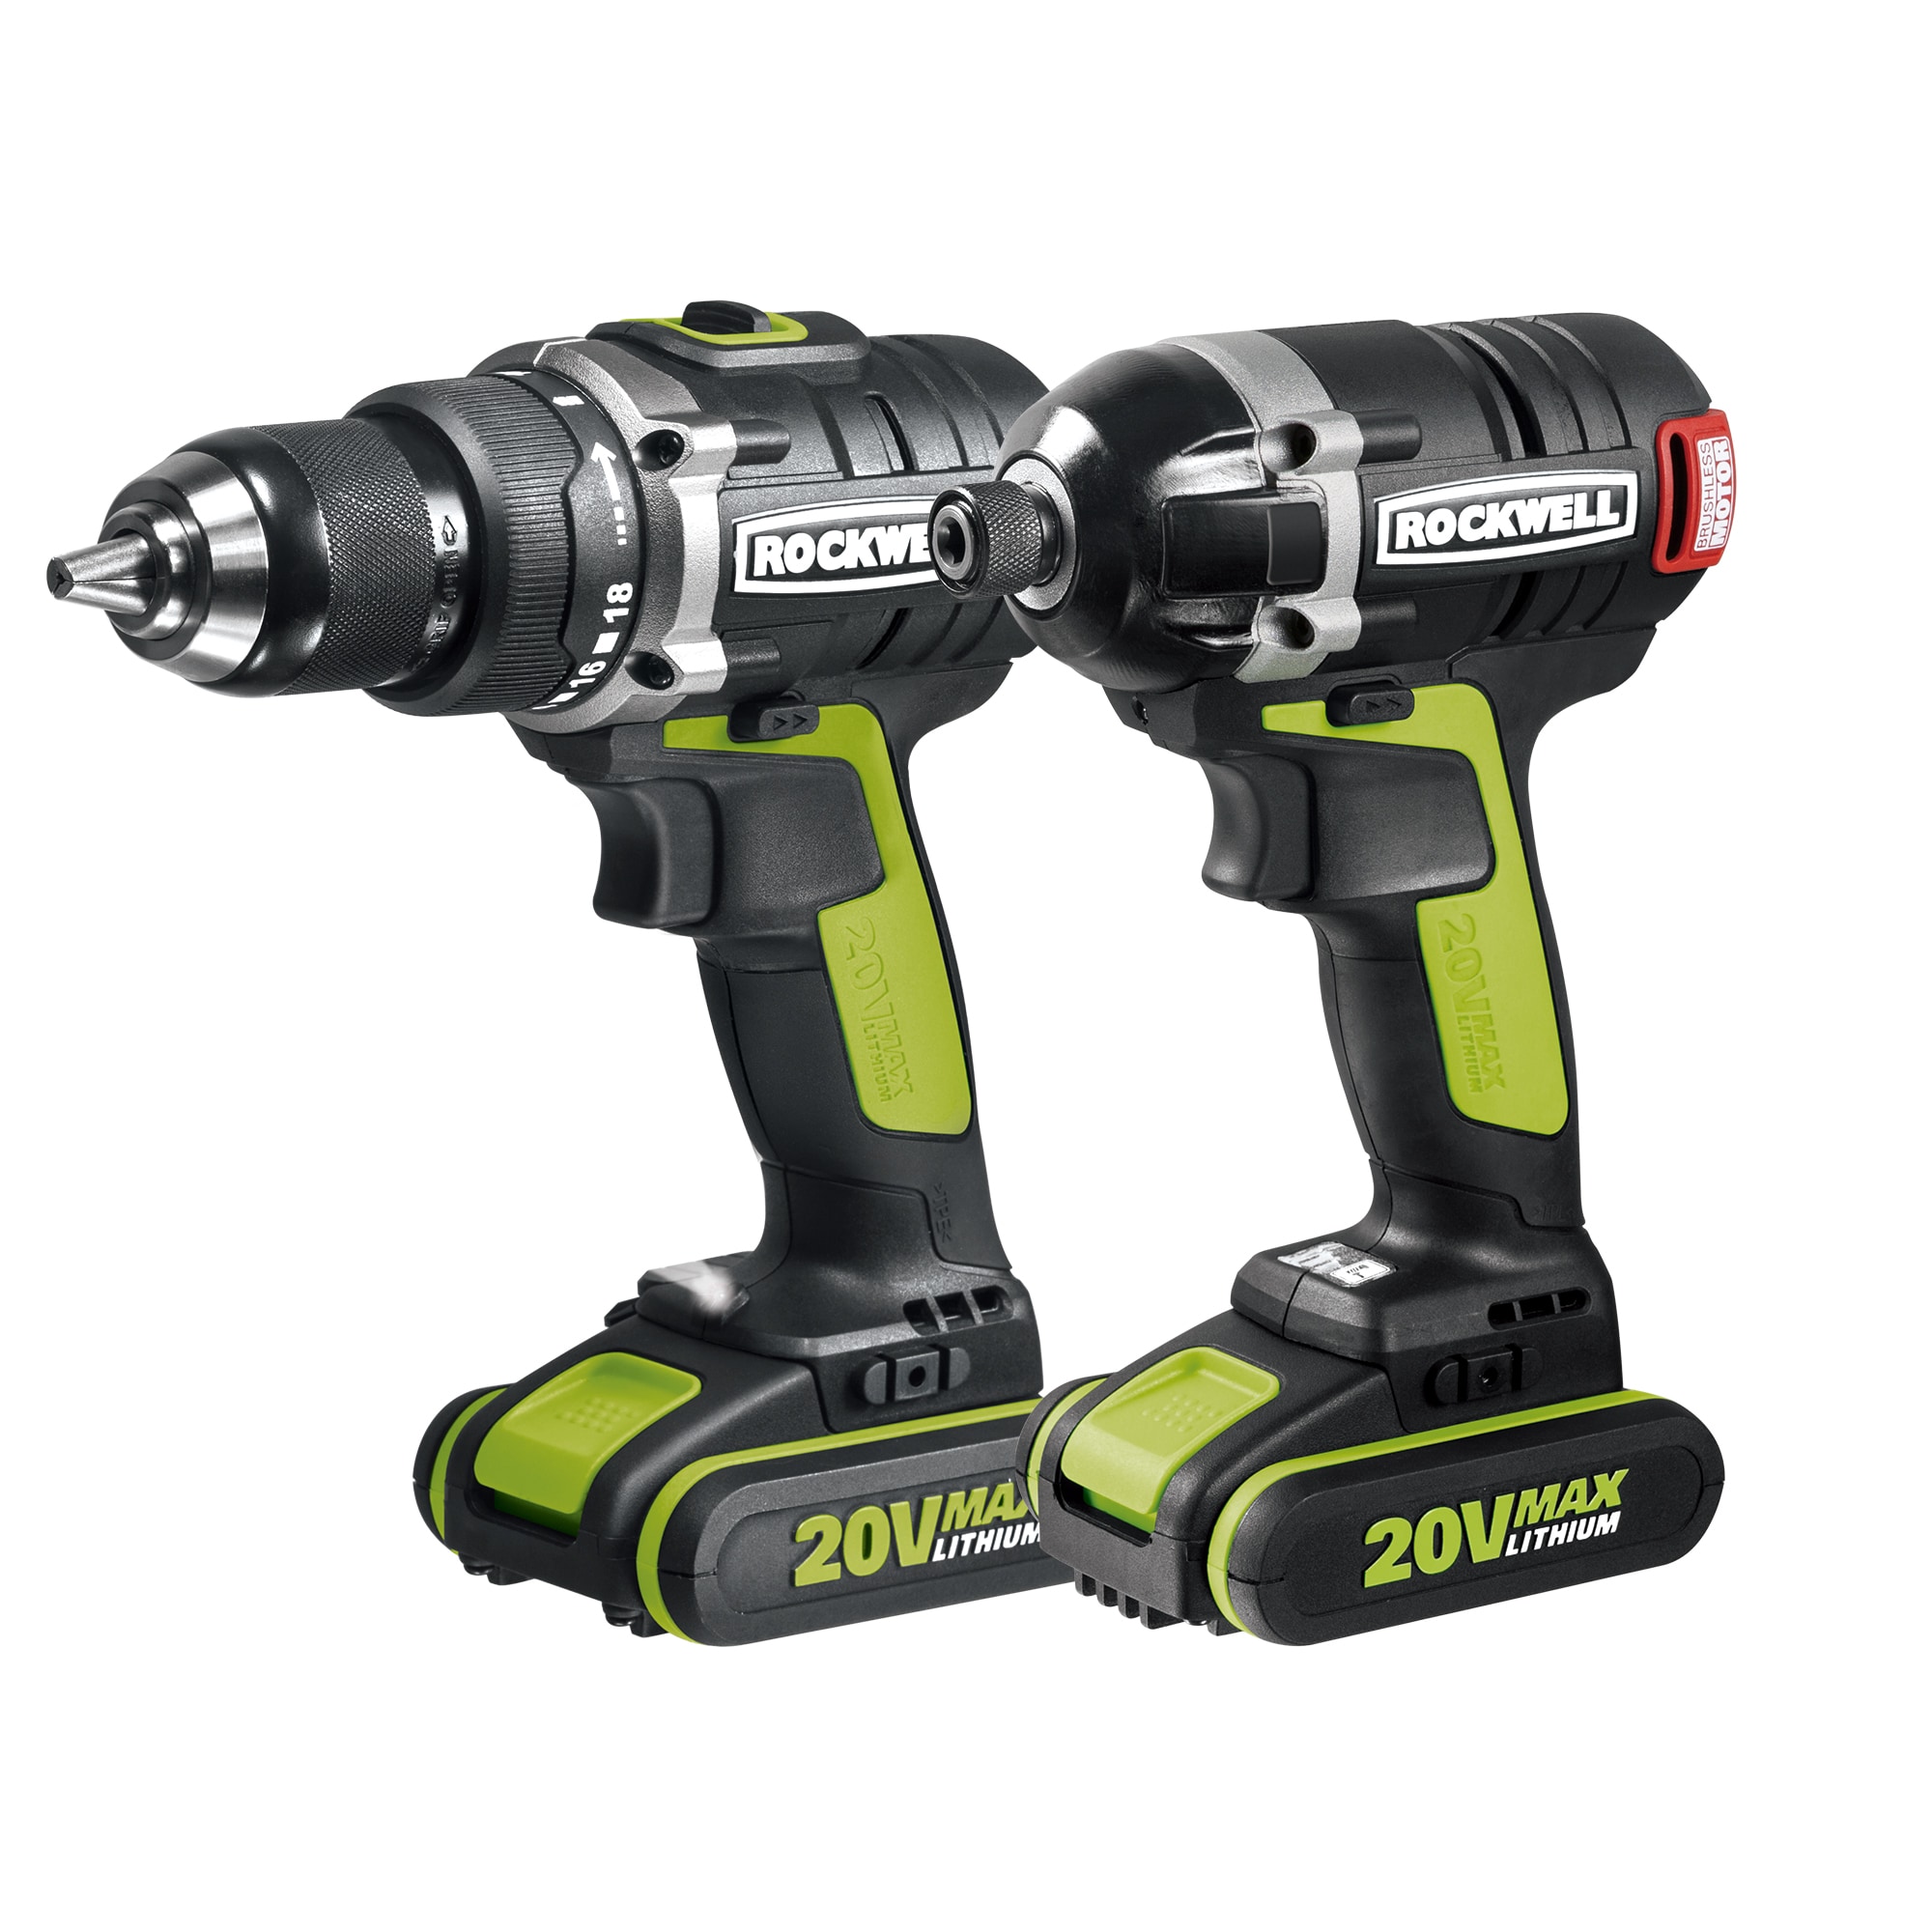 ROCKWELL 2-Tool 20-volt Max Brushless Power Combo Kit with Soft Case (2 Li-ion Batteries Included and in the Power Combo Kits department at Lowes.com